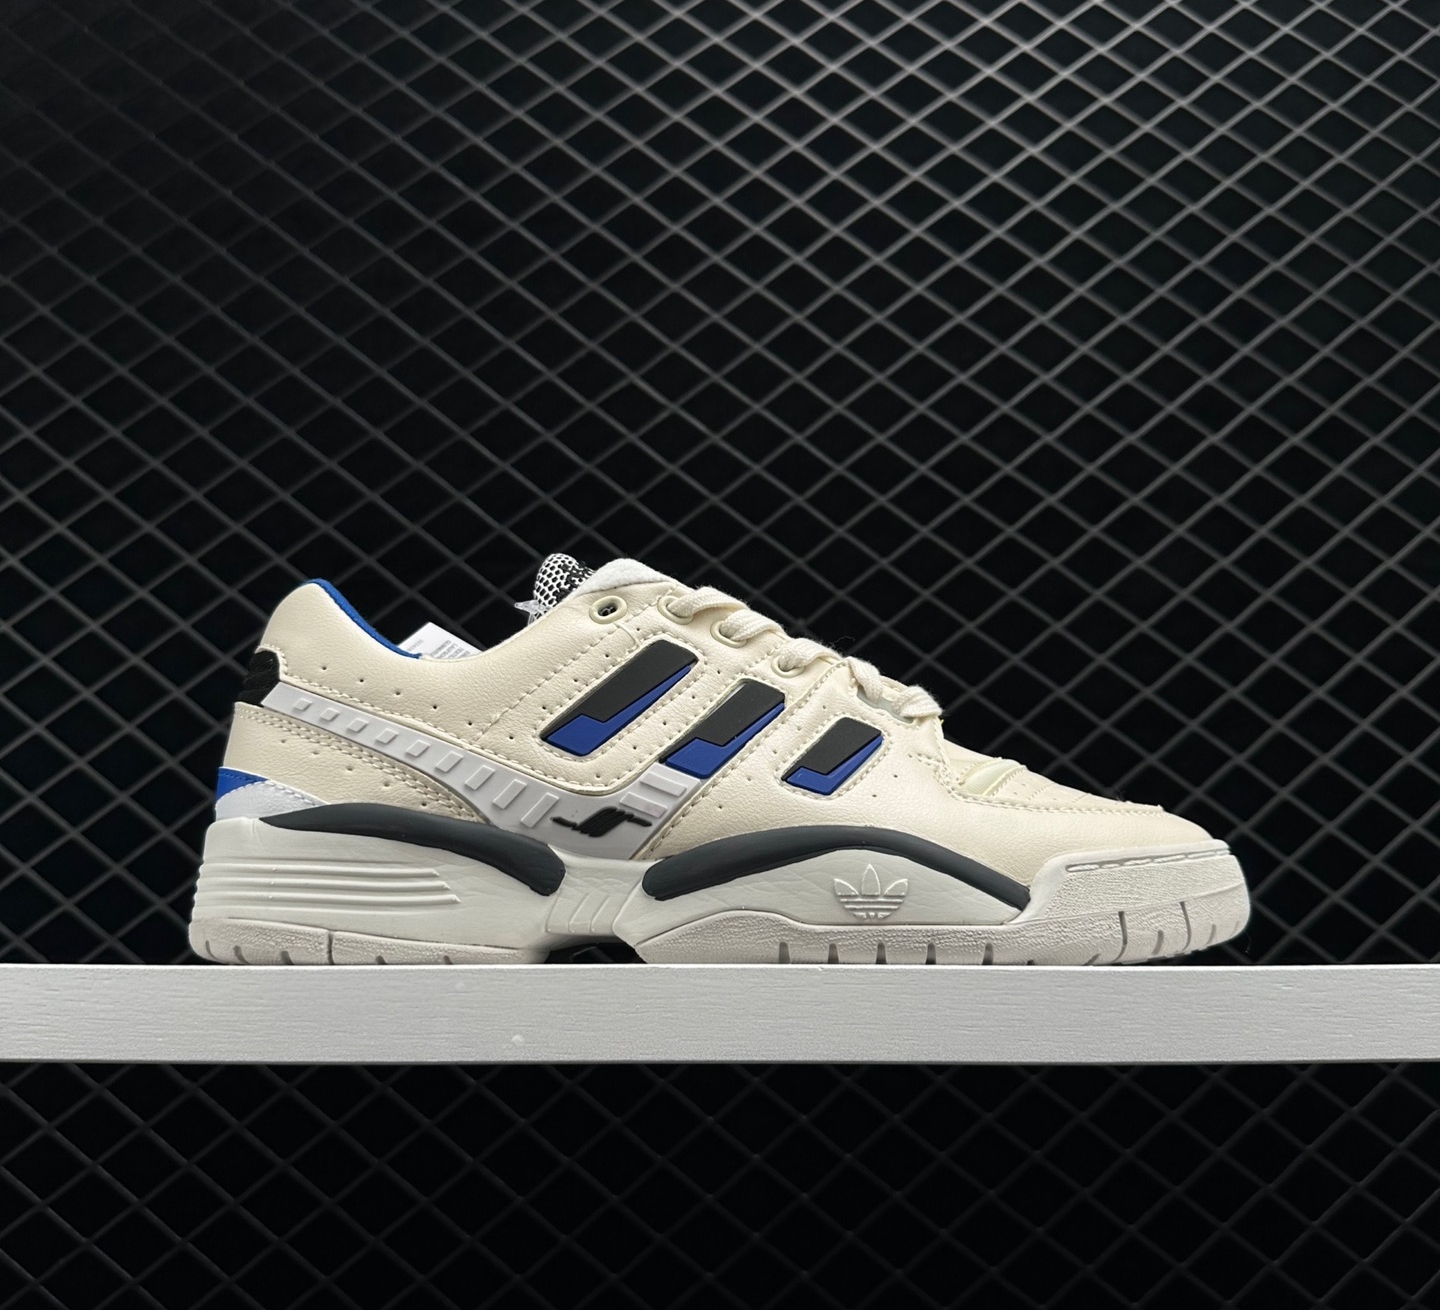 Adidas Originals TORSION COMP White Blue EE7377 - Stylish and Comfortable Footwear